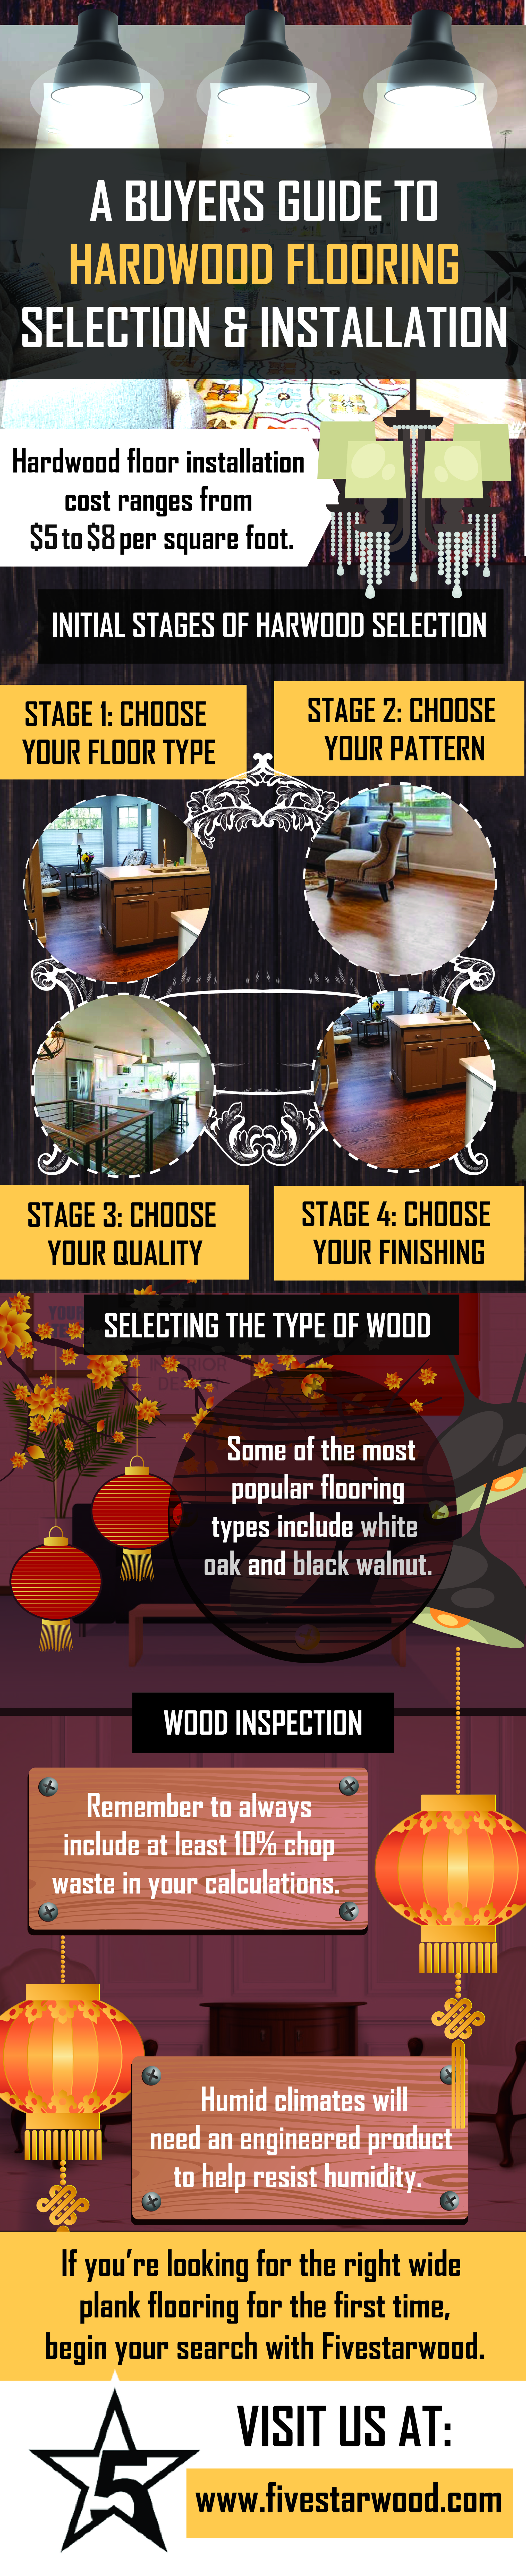 A Buyers Guide To Hardwood Flooring and Installation